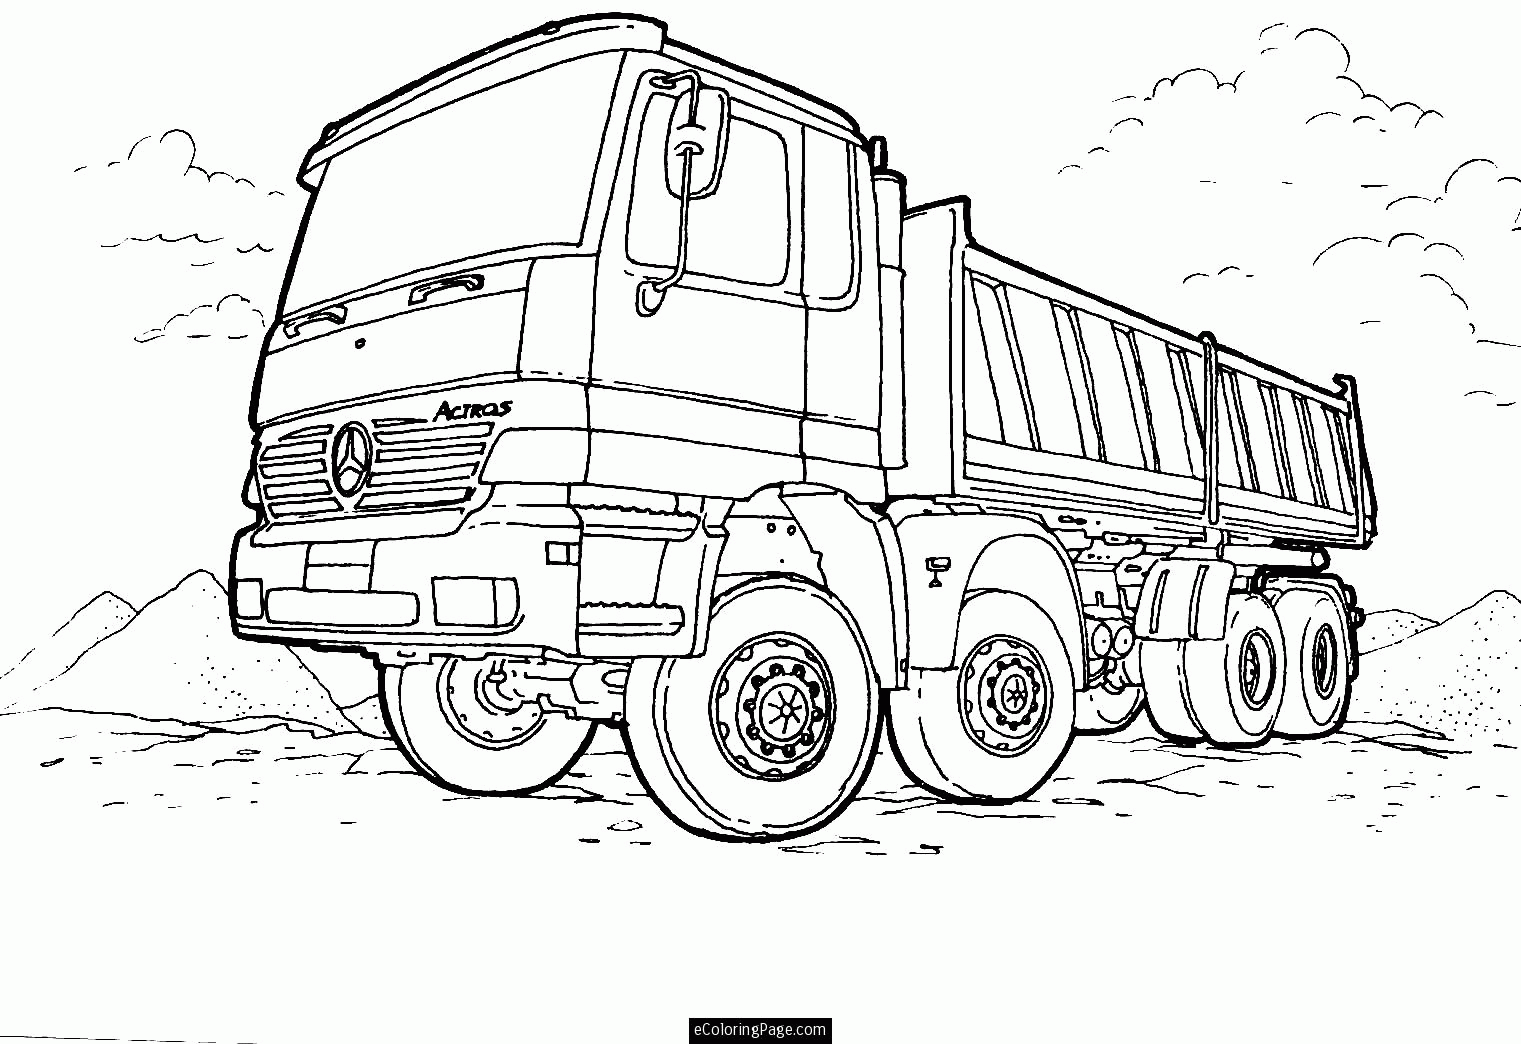 Coloring Pages Of Cars And Trucks - Coloring